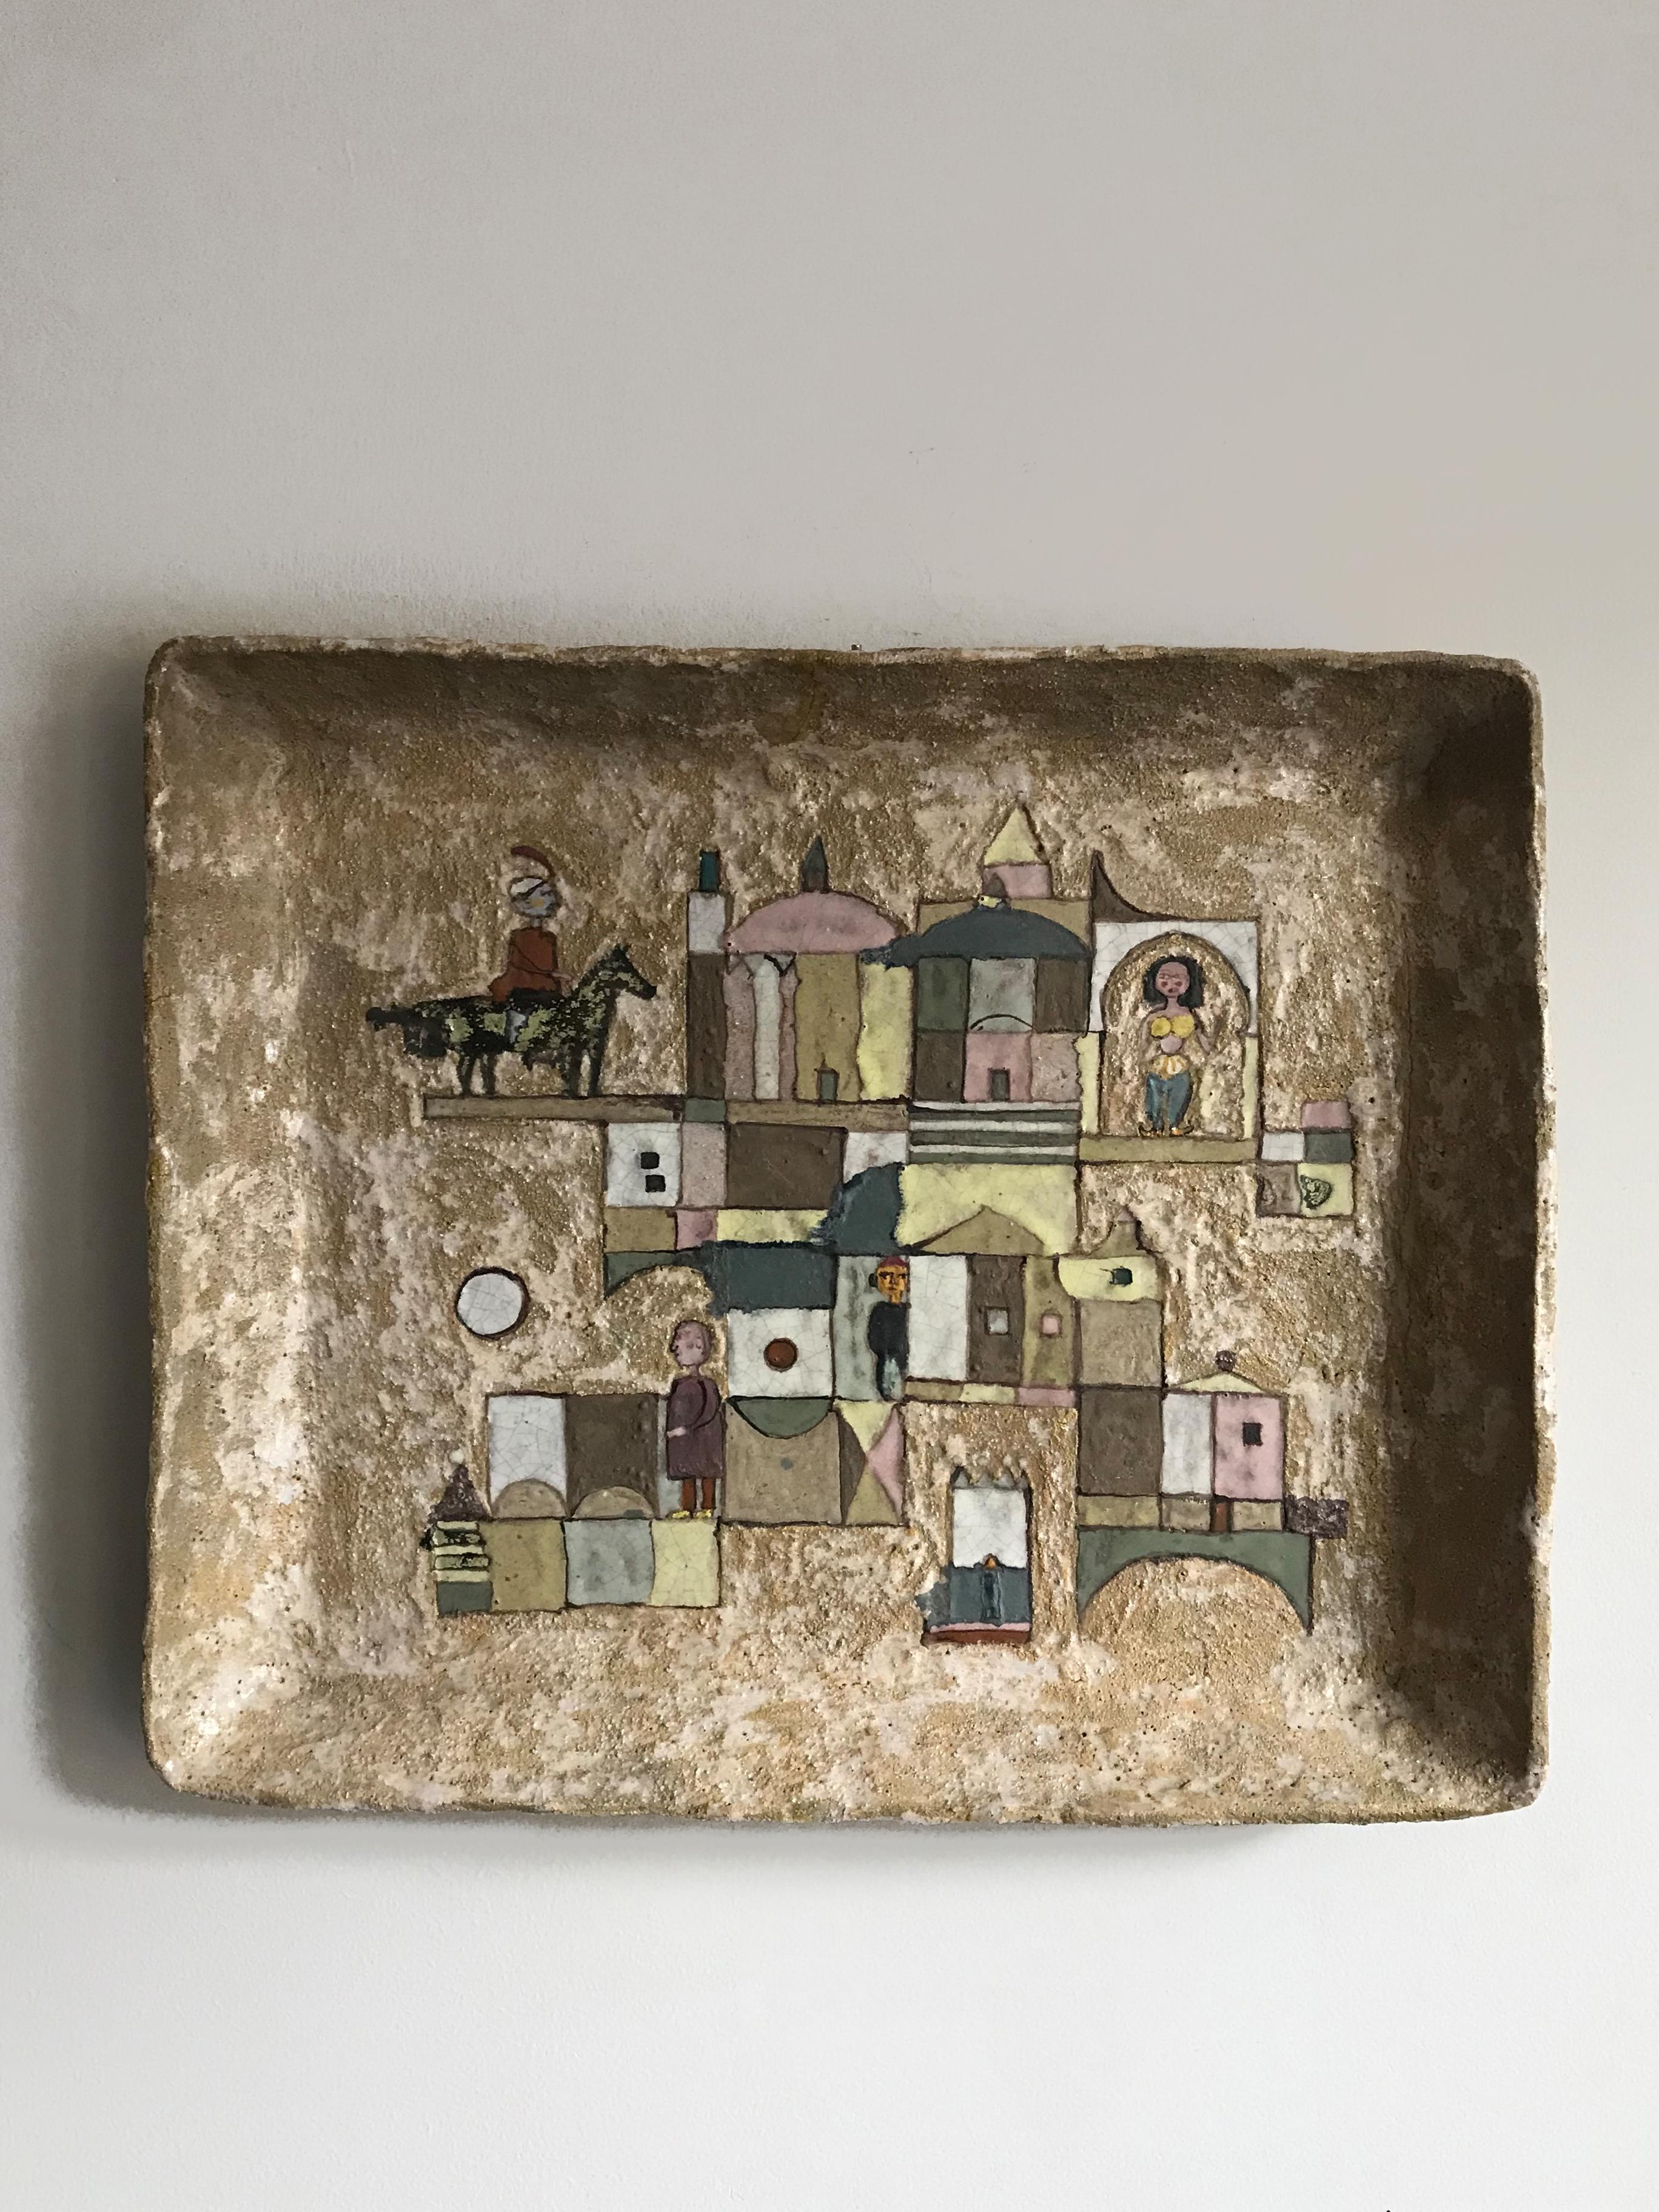 Italian midcentury modern design very large decorative ceramic wall tray designed by the Italian artist Ulisse Pagliari, background with rough workmanship decorated in polychrome with depictions of Houses and Figures,
with artist’s signature and